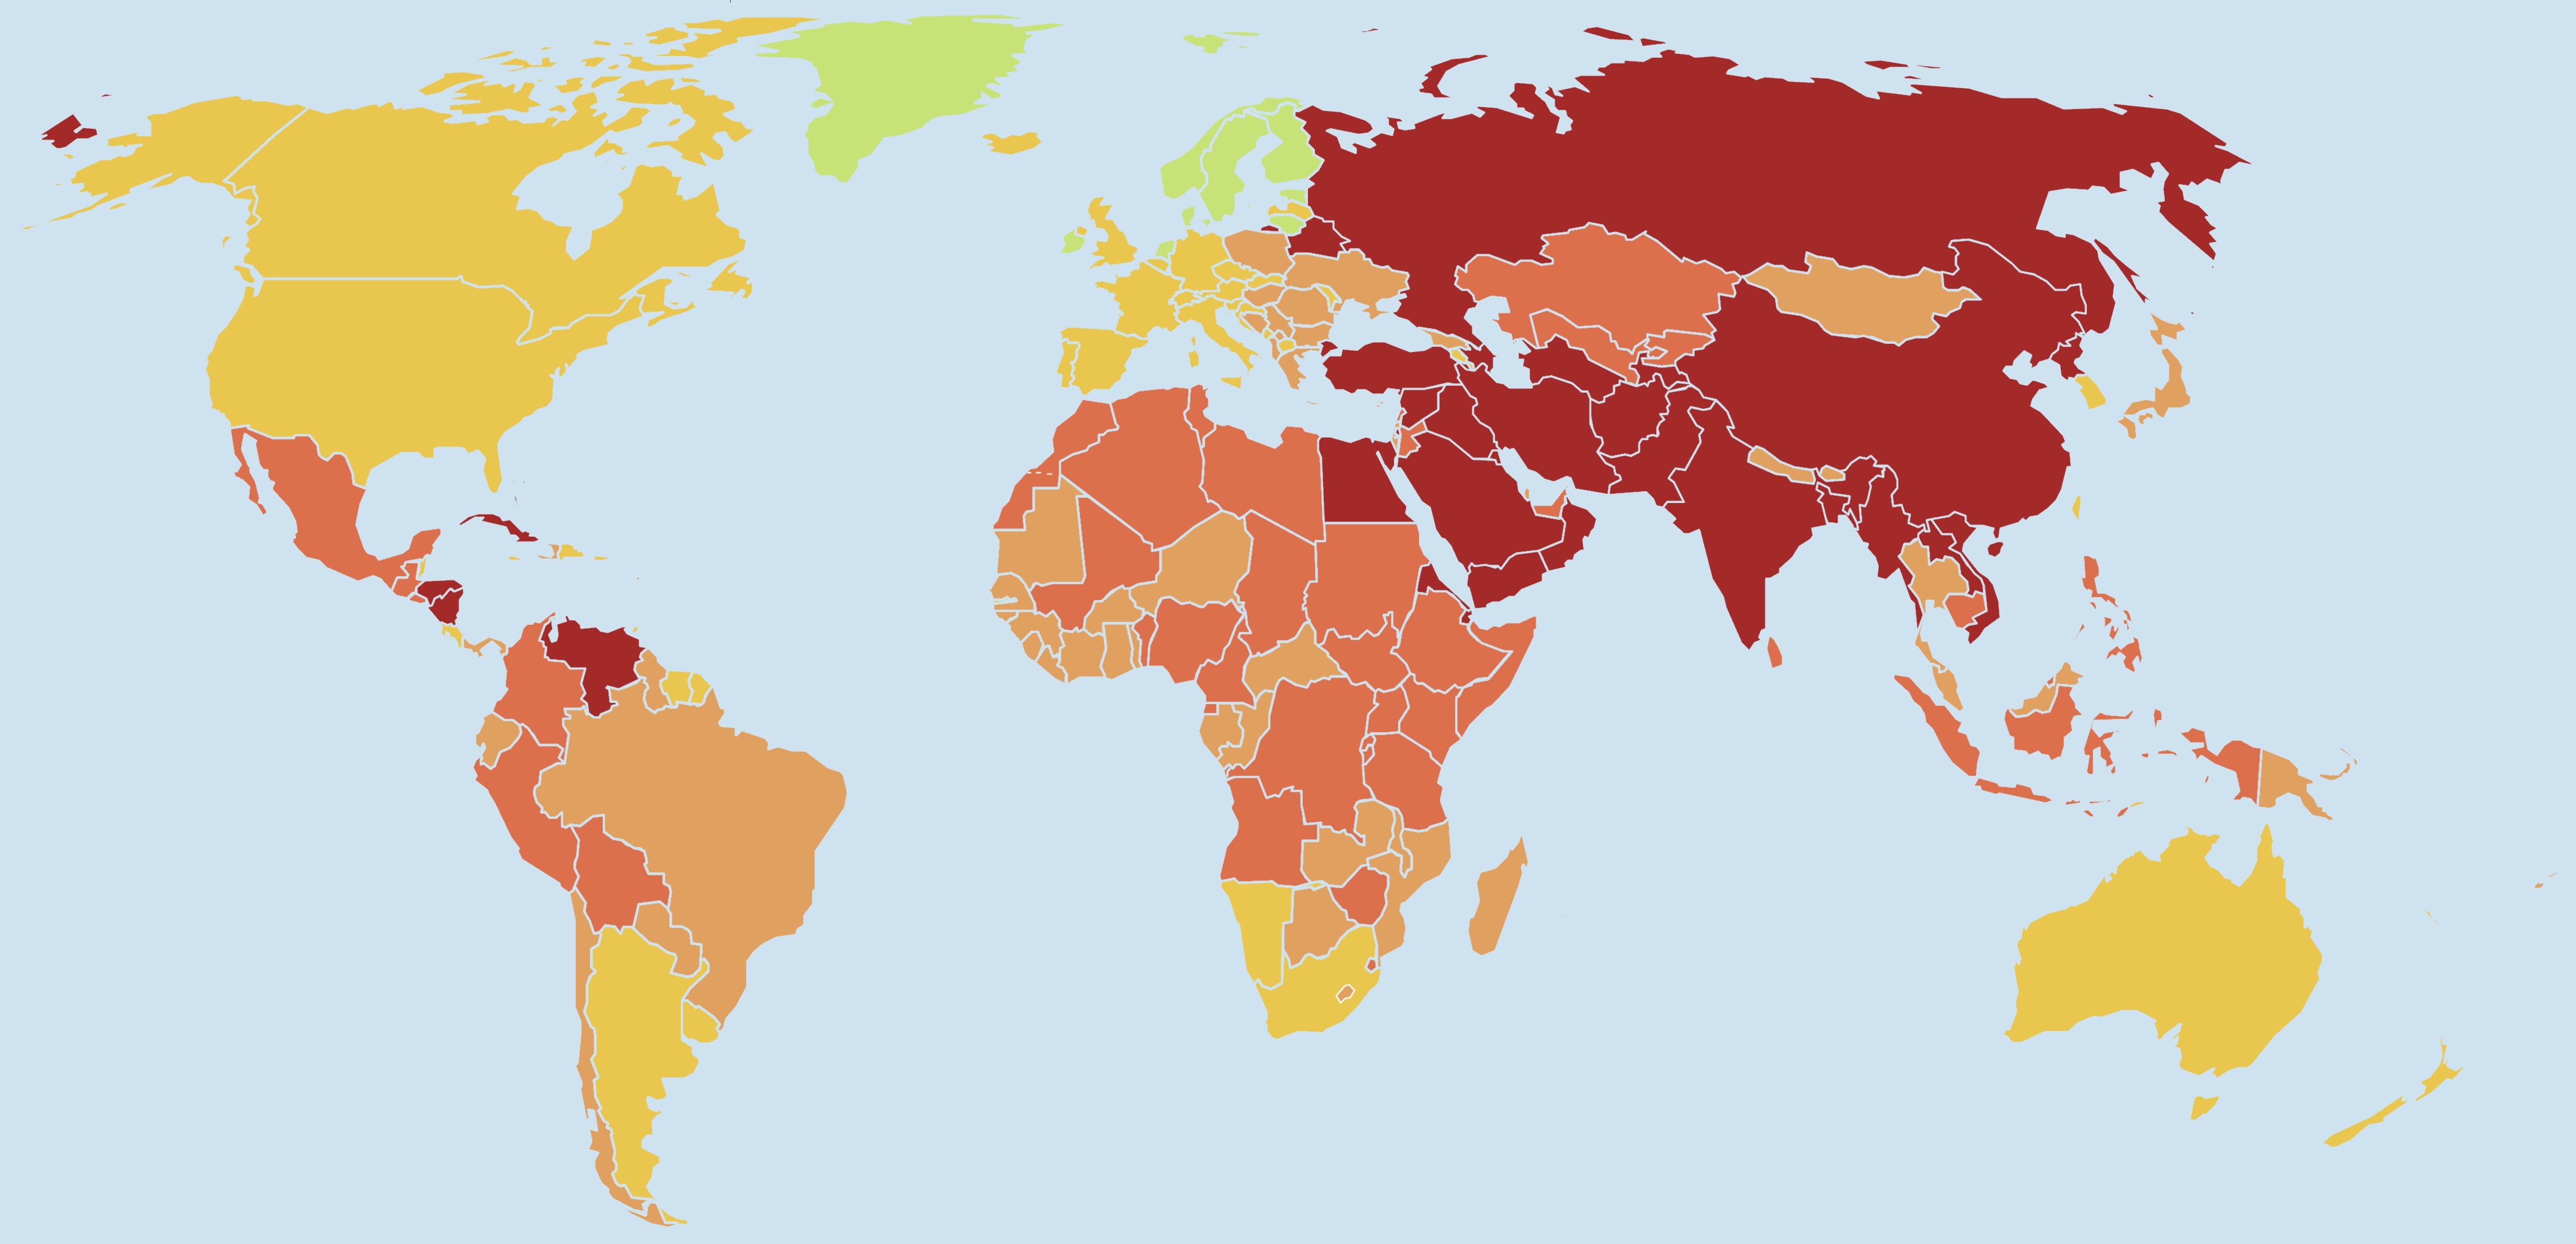 World map showing the 2023 Press Freedom Index per nation. In 2023, the United States (45th) fell three places. The Index questionnaire’s U.S. respondents were negative about the environment for journalists (especially the legal framework at the local level, and widespread violence) despite the Biden administration’s efforts. The situation went from “problematic” to “very bad” in three other countries: Tajikistan (down 1 at 153rd), India (down 11 at 161st), and Turkey (down 16 at 165th). In India, media takeovers by oligarchs close to Prime Minister Modi  jeopardised pluralism, while the Erdogan administration in Turkey stepped up its persecution of journalists in the run-up to elections scheduled for 14 May. In Iran (177th), the heavy-handed crackdown on the protests triggered by the young student Mahsa Amini’s death in police custody drove the country’s “social context” and “judicial environment” scores even lower. Some of the 2023 Index’s biggest falls were in Africa. Until recently a regional model, Senegal (104th) fell 31 places, above all because of the criminal charges brought against two journalists, Pape Alé Niang and Pape Ndiaye, and the sharp decline in security for media personnel. In the Maghreb, Tunisia (121st) fell 27 places as a result of President Kais Saied’s growing authoritarianism and inability to tolerate media criticism. In Latin America, Peru (110th) plummeted 33 places because its journalists were paying dearly for the persistent political instability and were being harassed, attacked and smeared because of their proximity to leading politicians. The fall by Haiti (down 29 at 99th) was also due mainly to the continuing decline in the security environment. Graphic: RSF